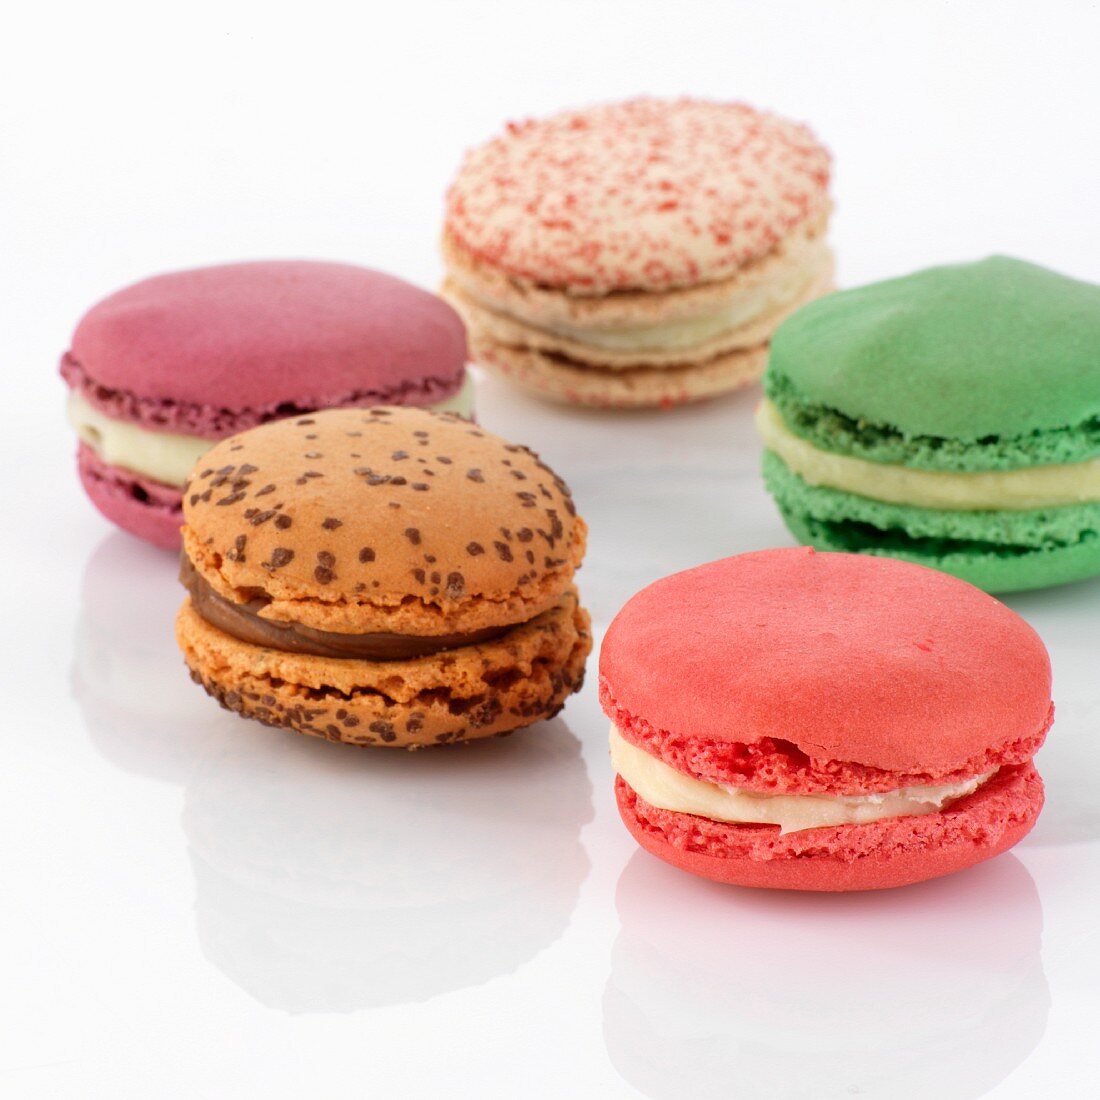 Several different macarons